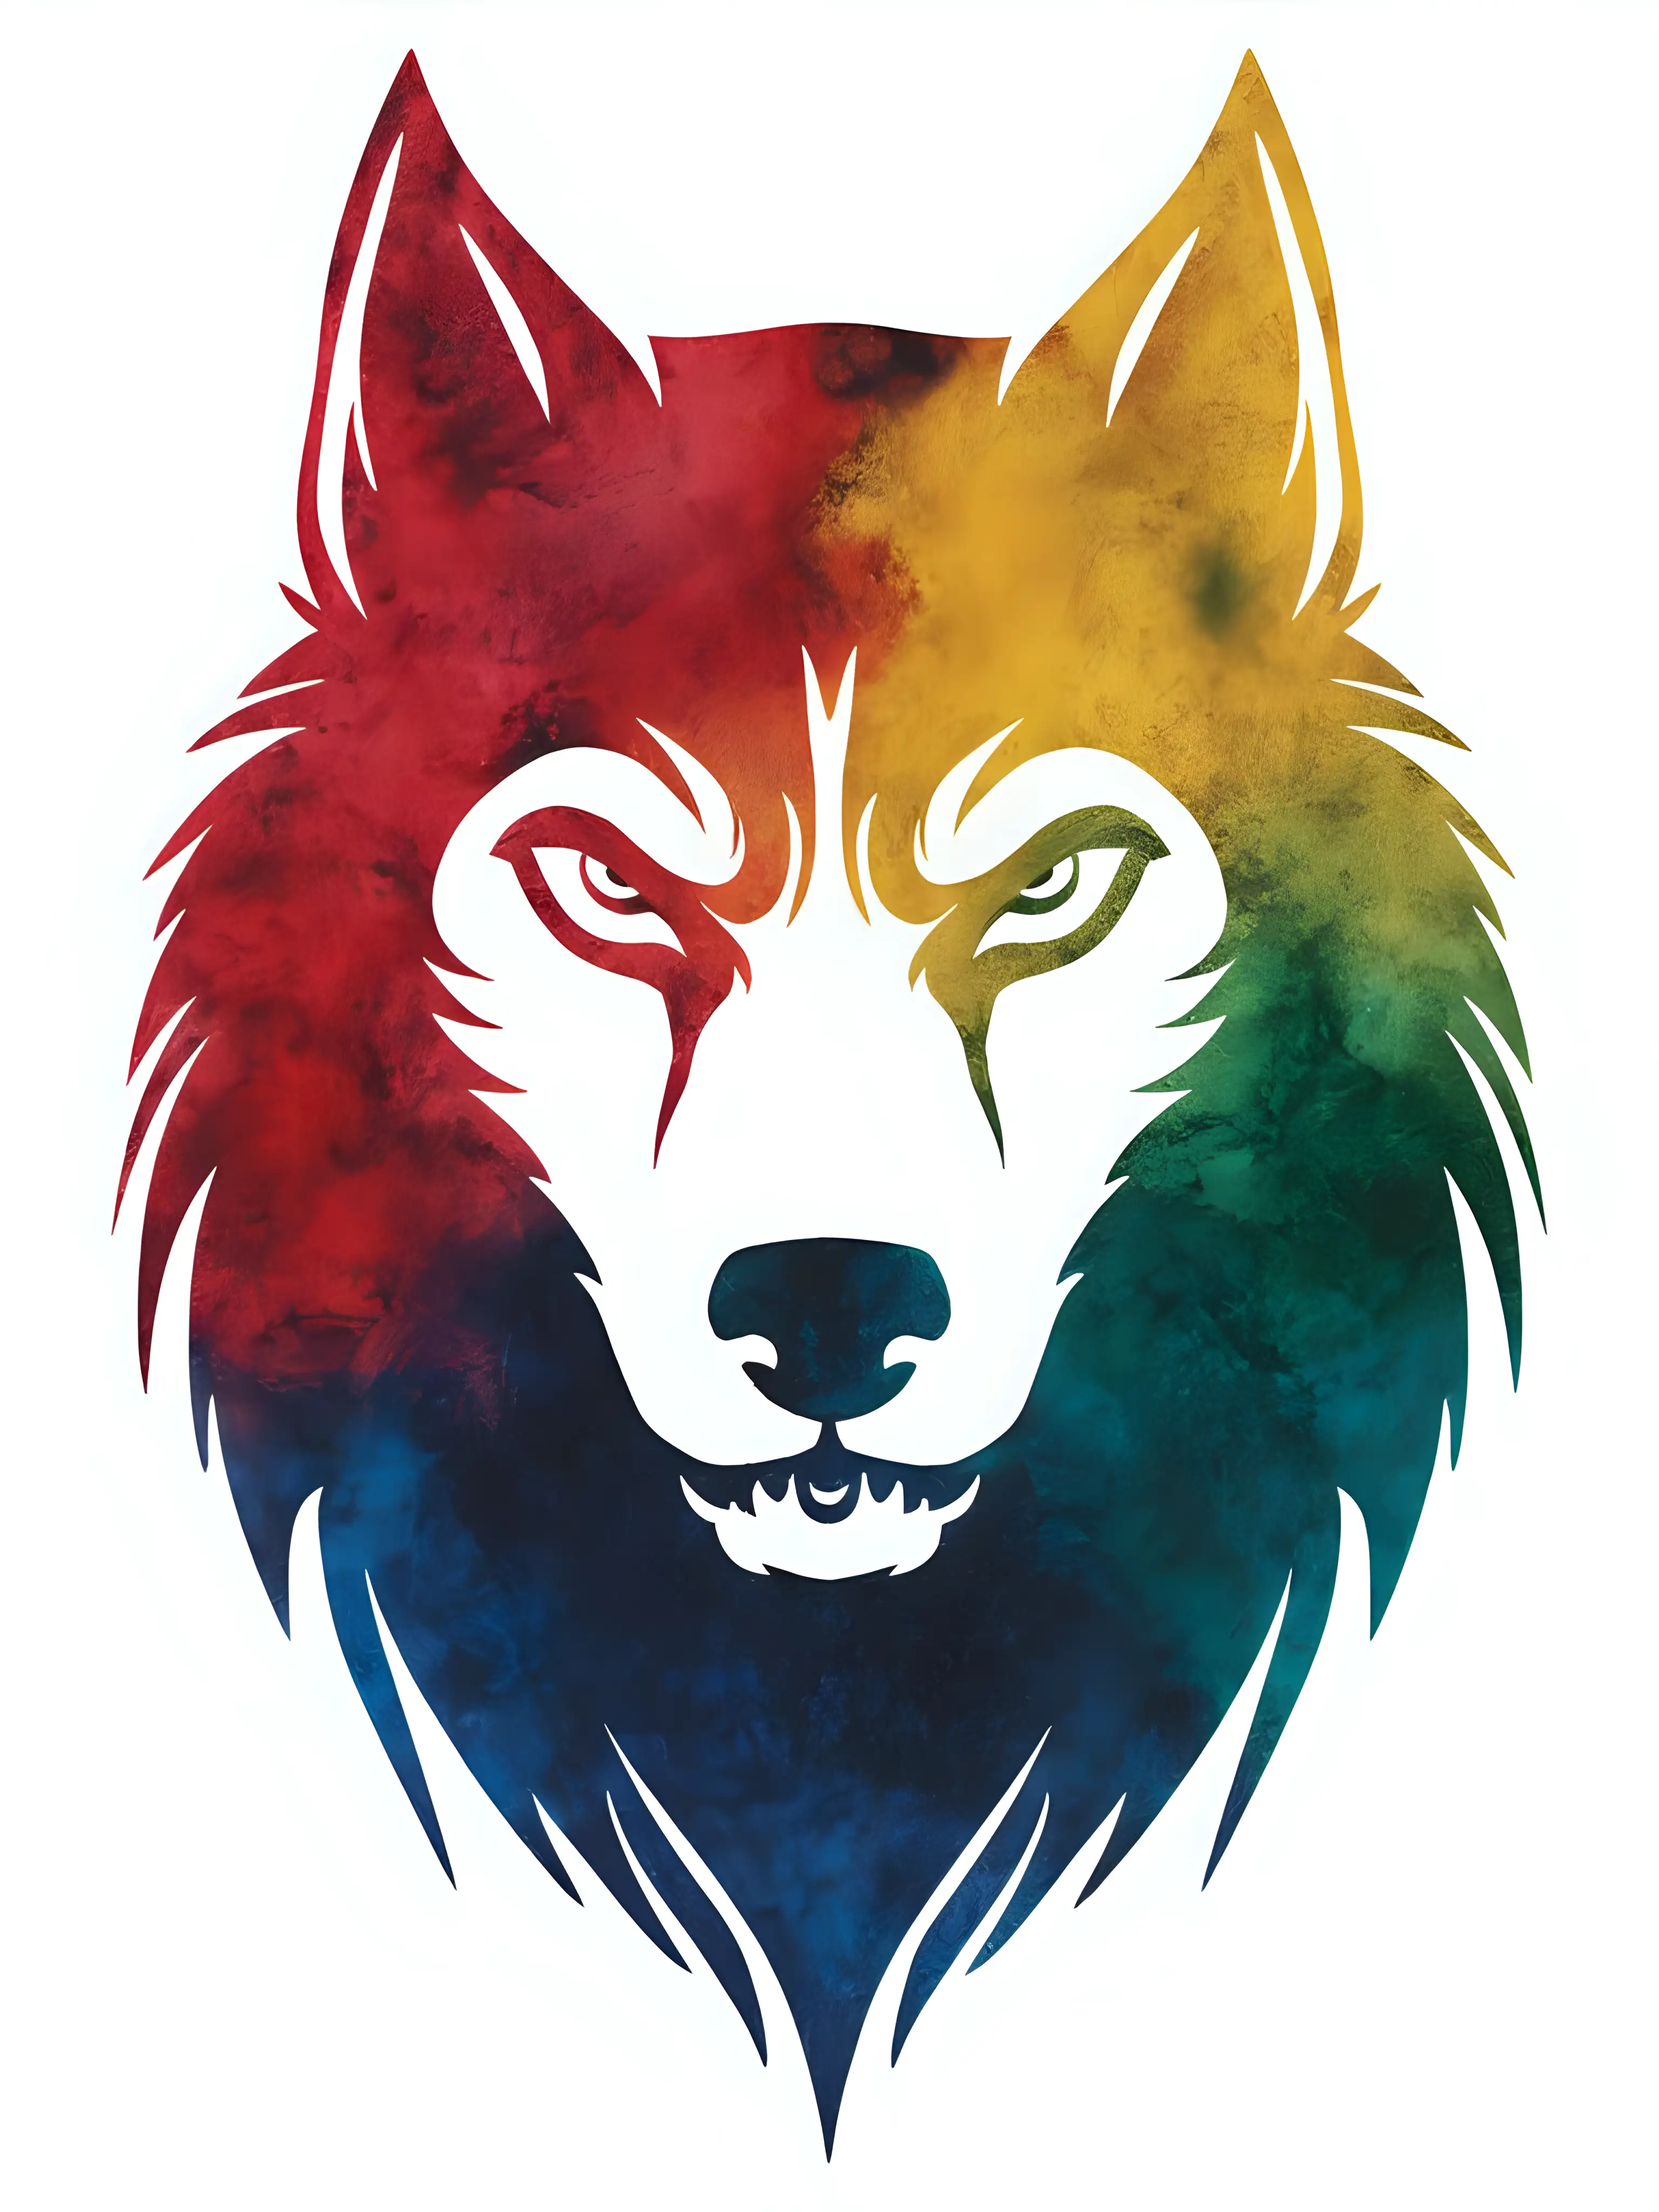 Colorful Watercolor Illustration of a Captivating Werewolf